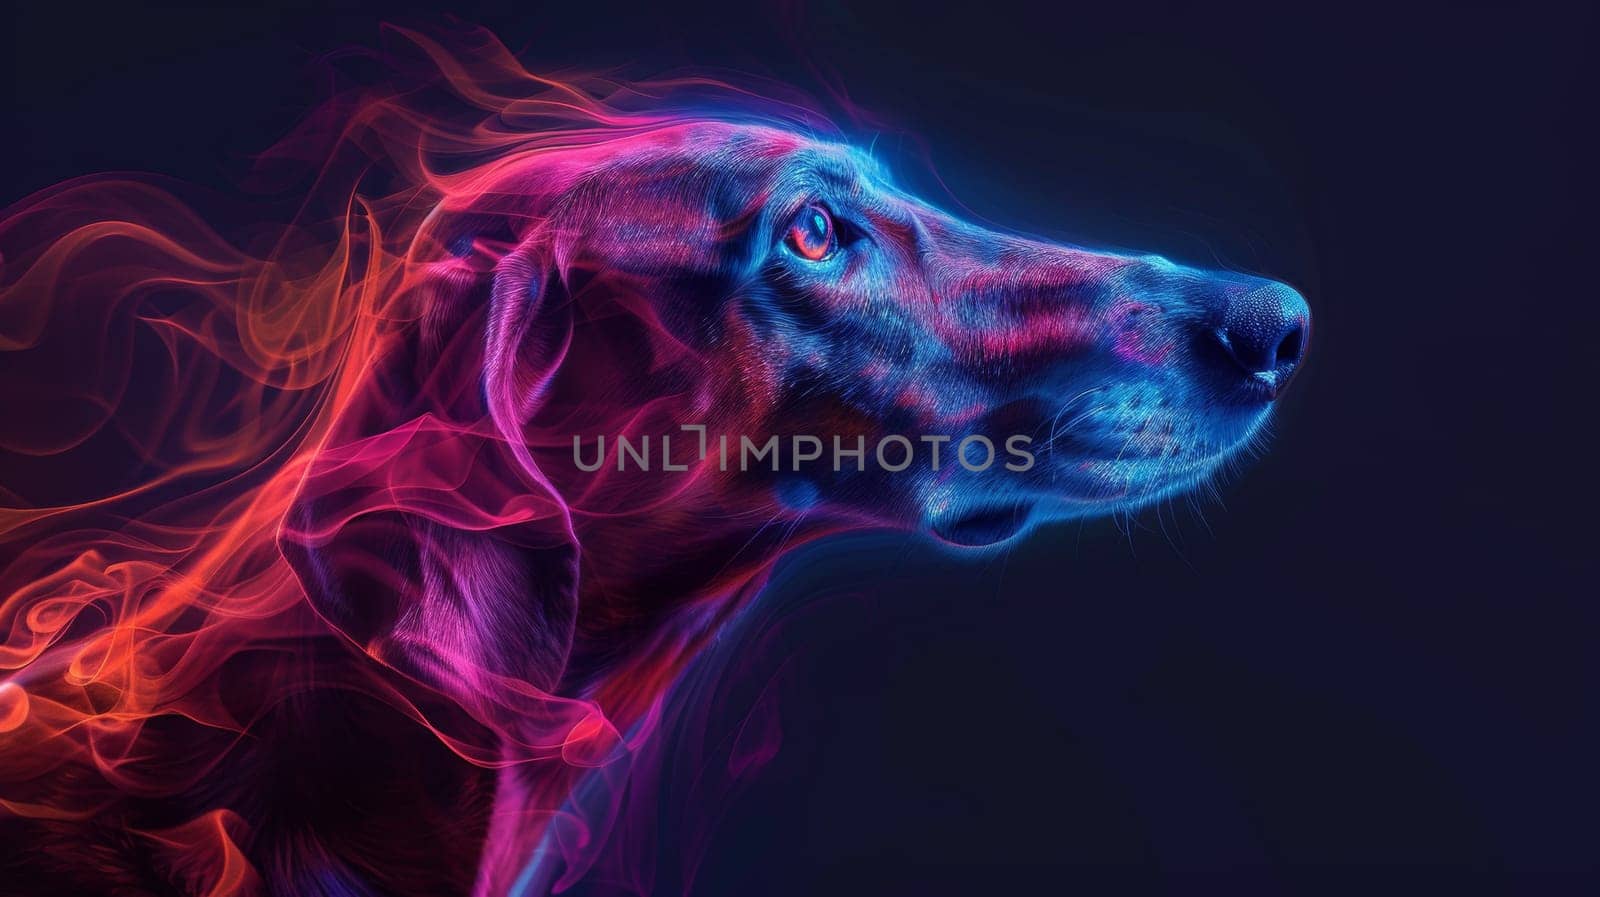 A dog is painted in a colorful way with smoke